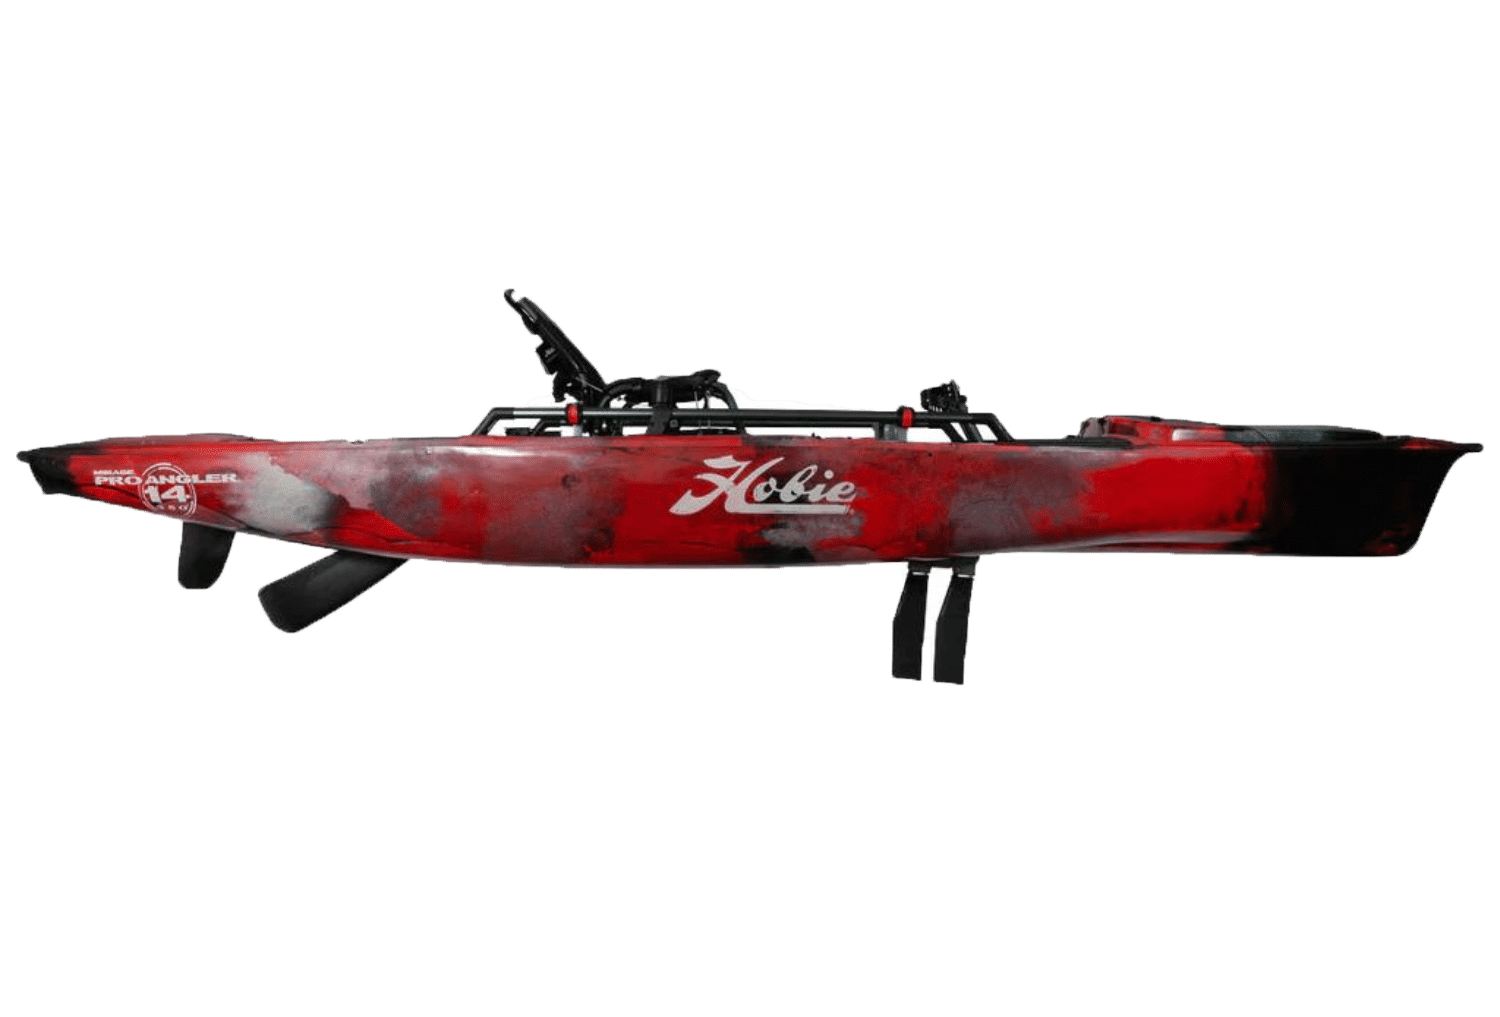 Side profile of the Hobie Pro Angler 14 with 360XR drive in the Campfire (red) camo colour scheme.